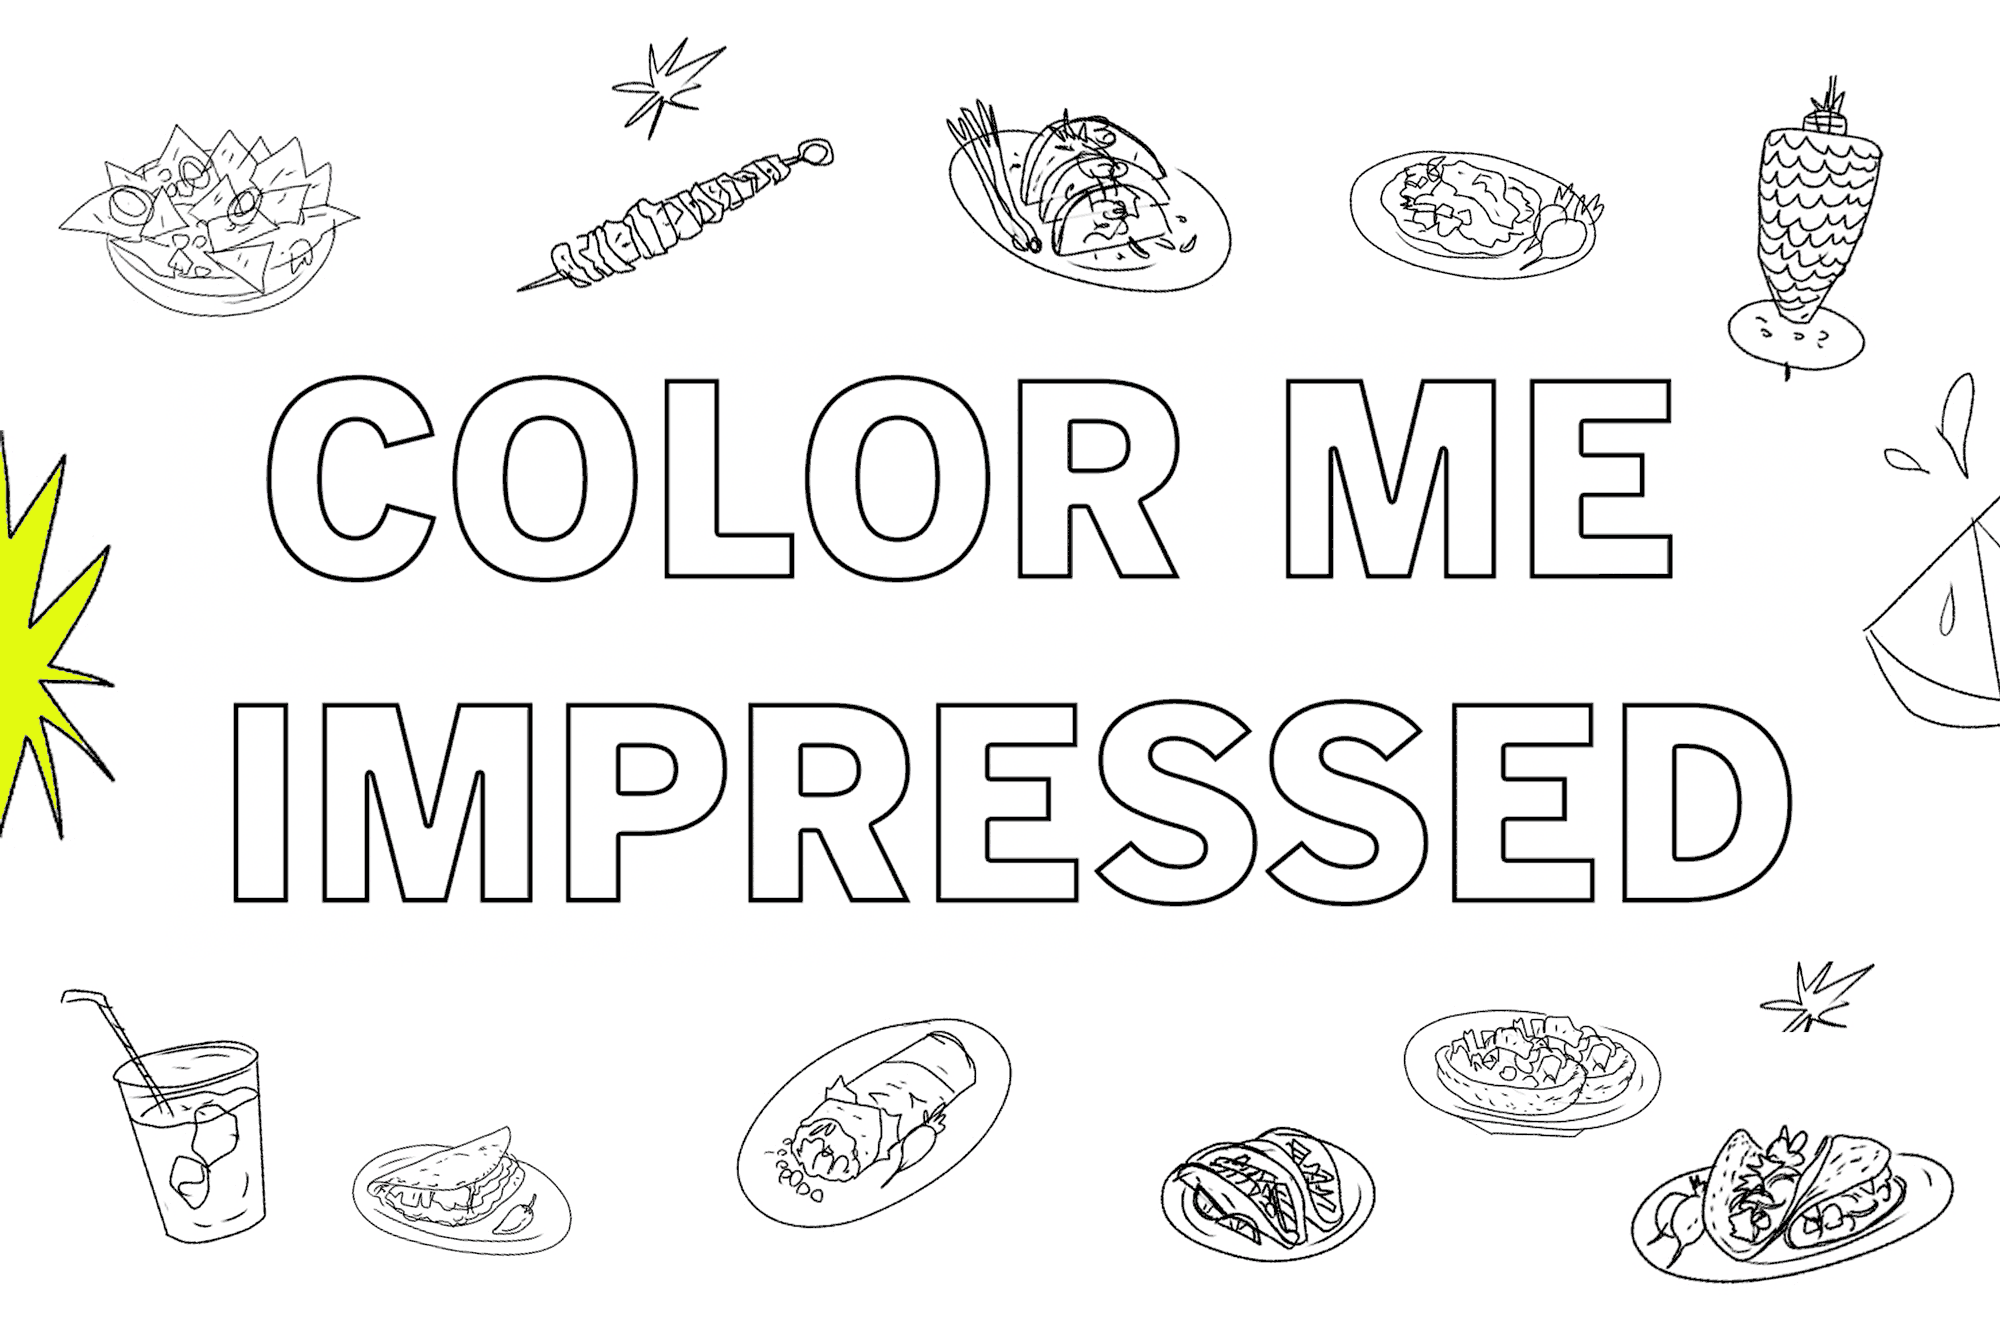 This food coloring book is perfect for social distancing